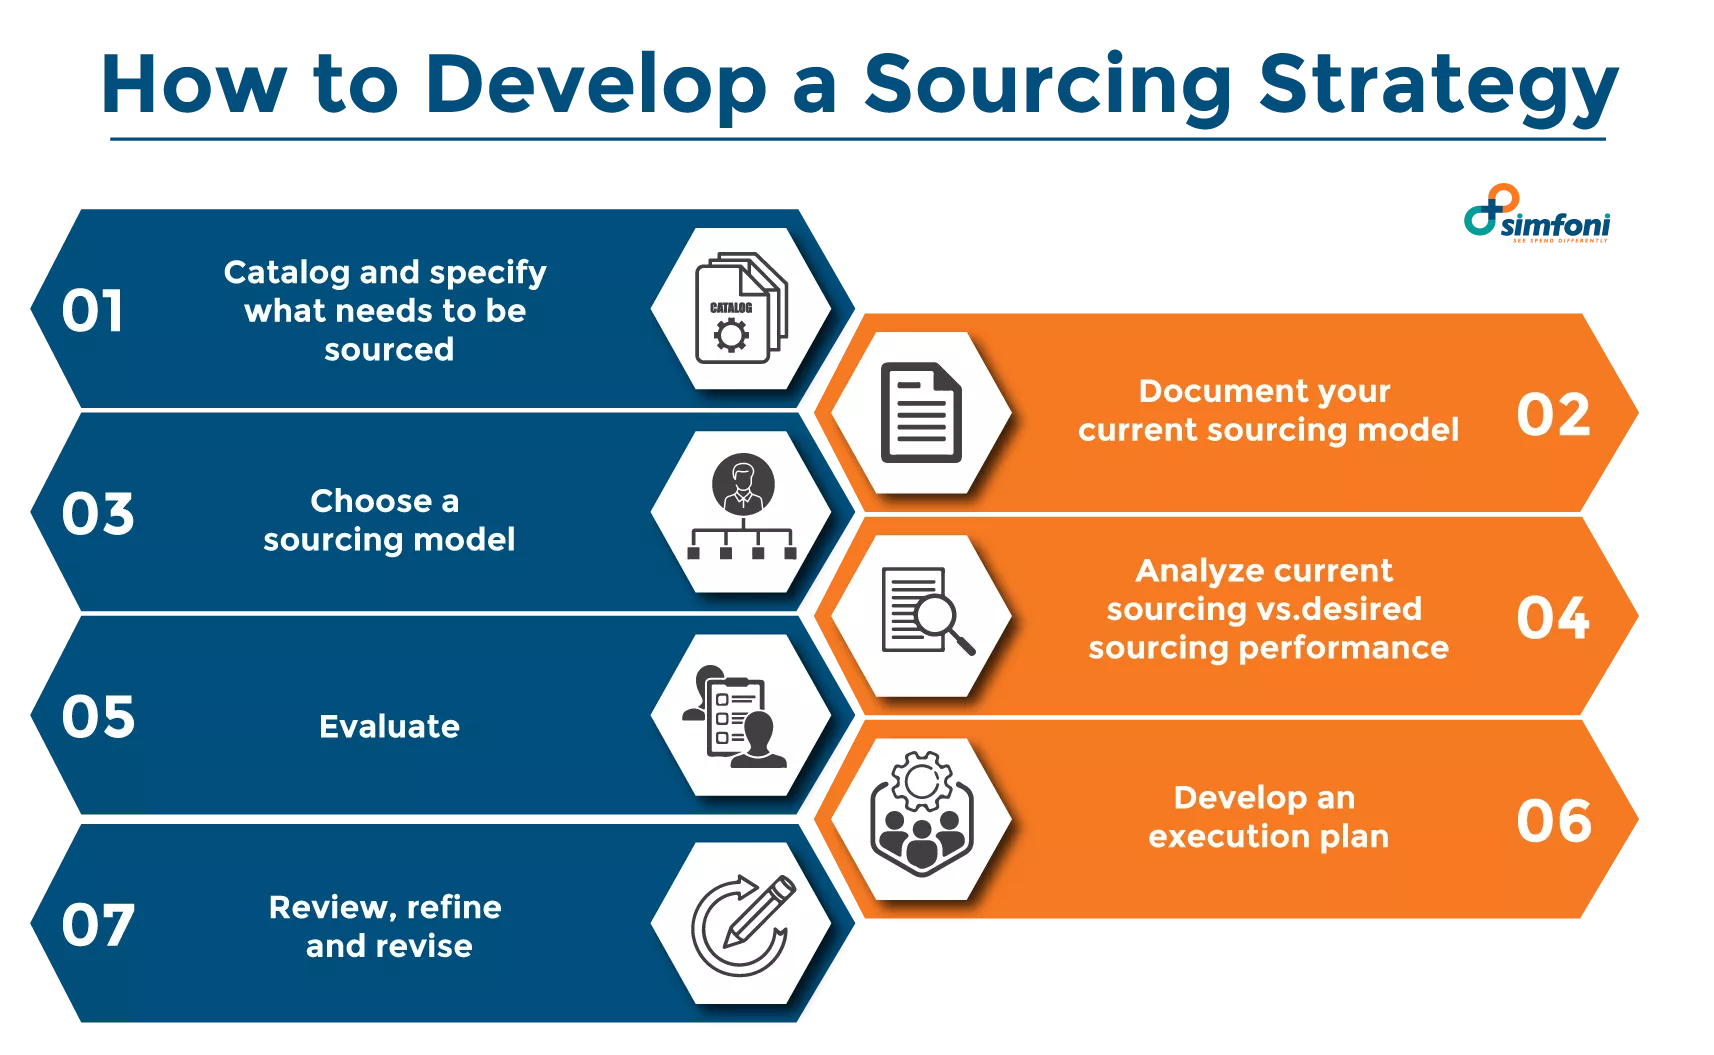 Sourcing Strategy